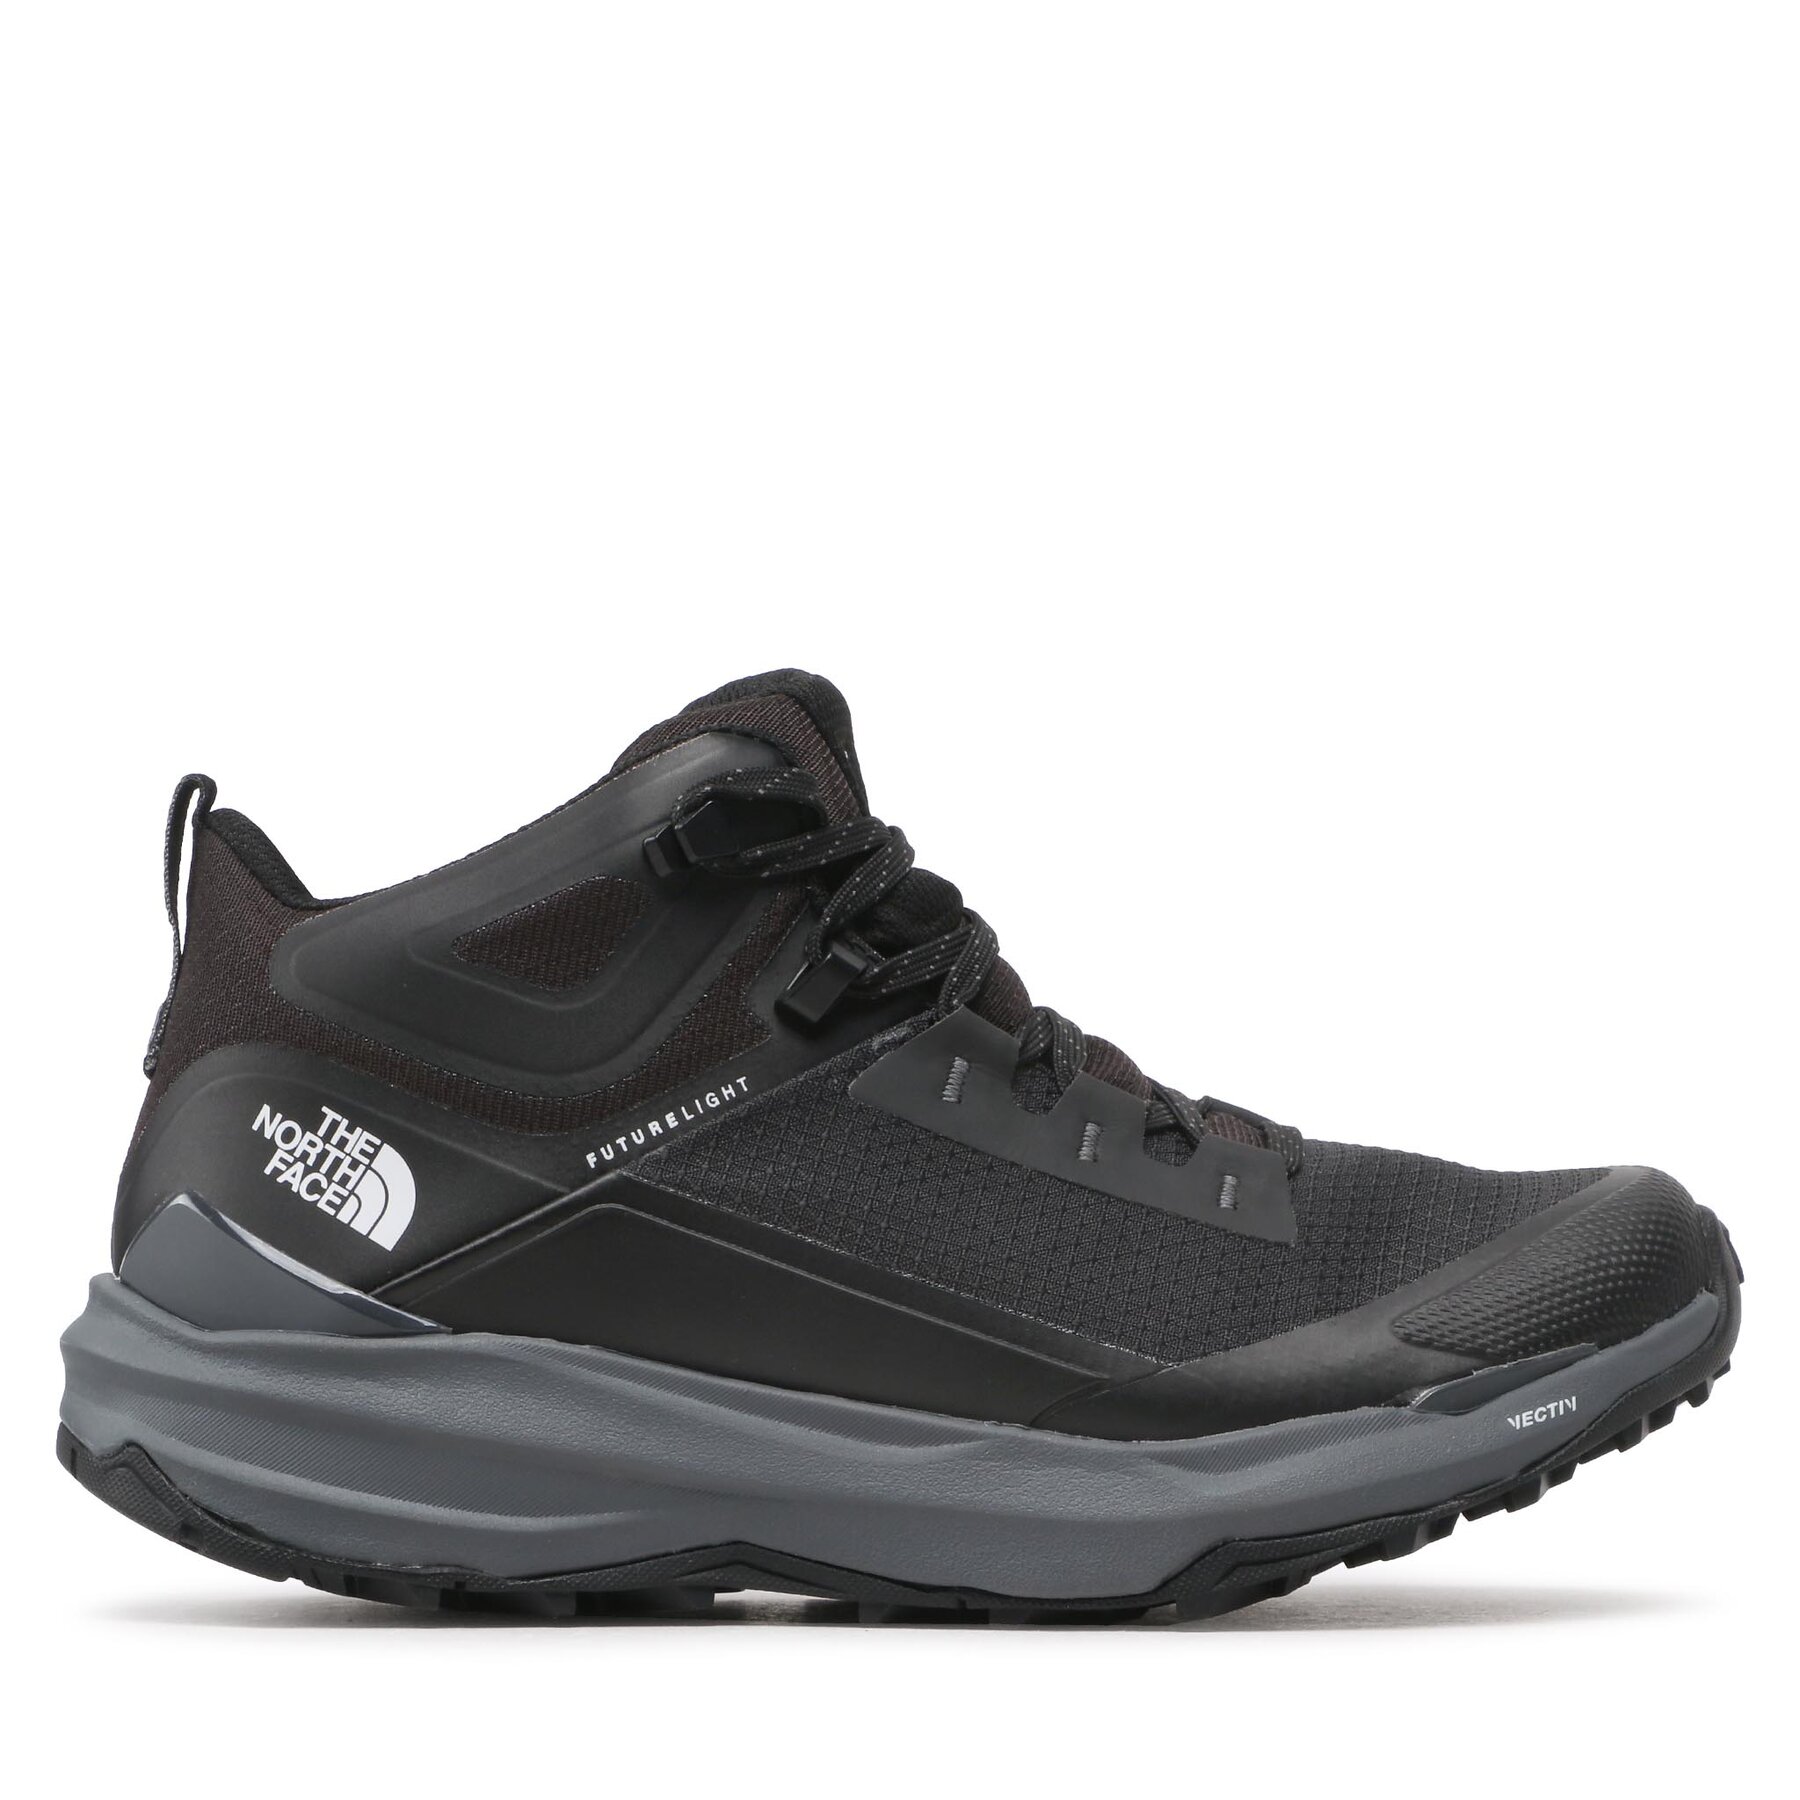 Trekkingschuhe The North Face Vectiv Exploris 2 Mid NF0A7W6ANY71 Schwarz von The North Face